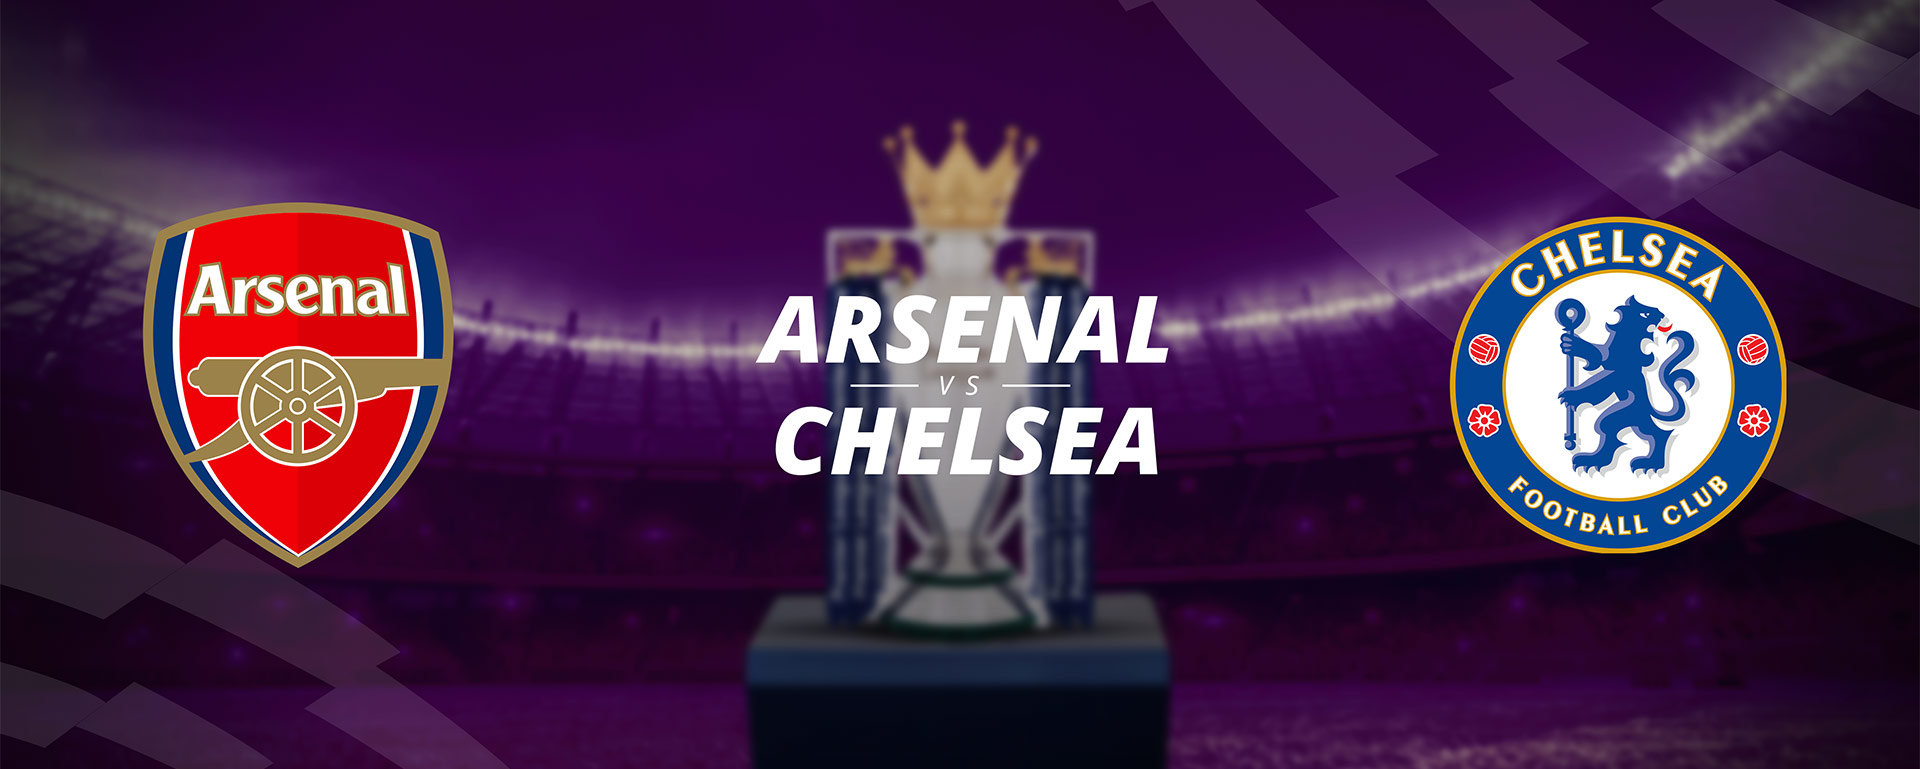 ARSENAL VS CHELSEA: BETTING PREVIEW